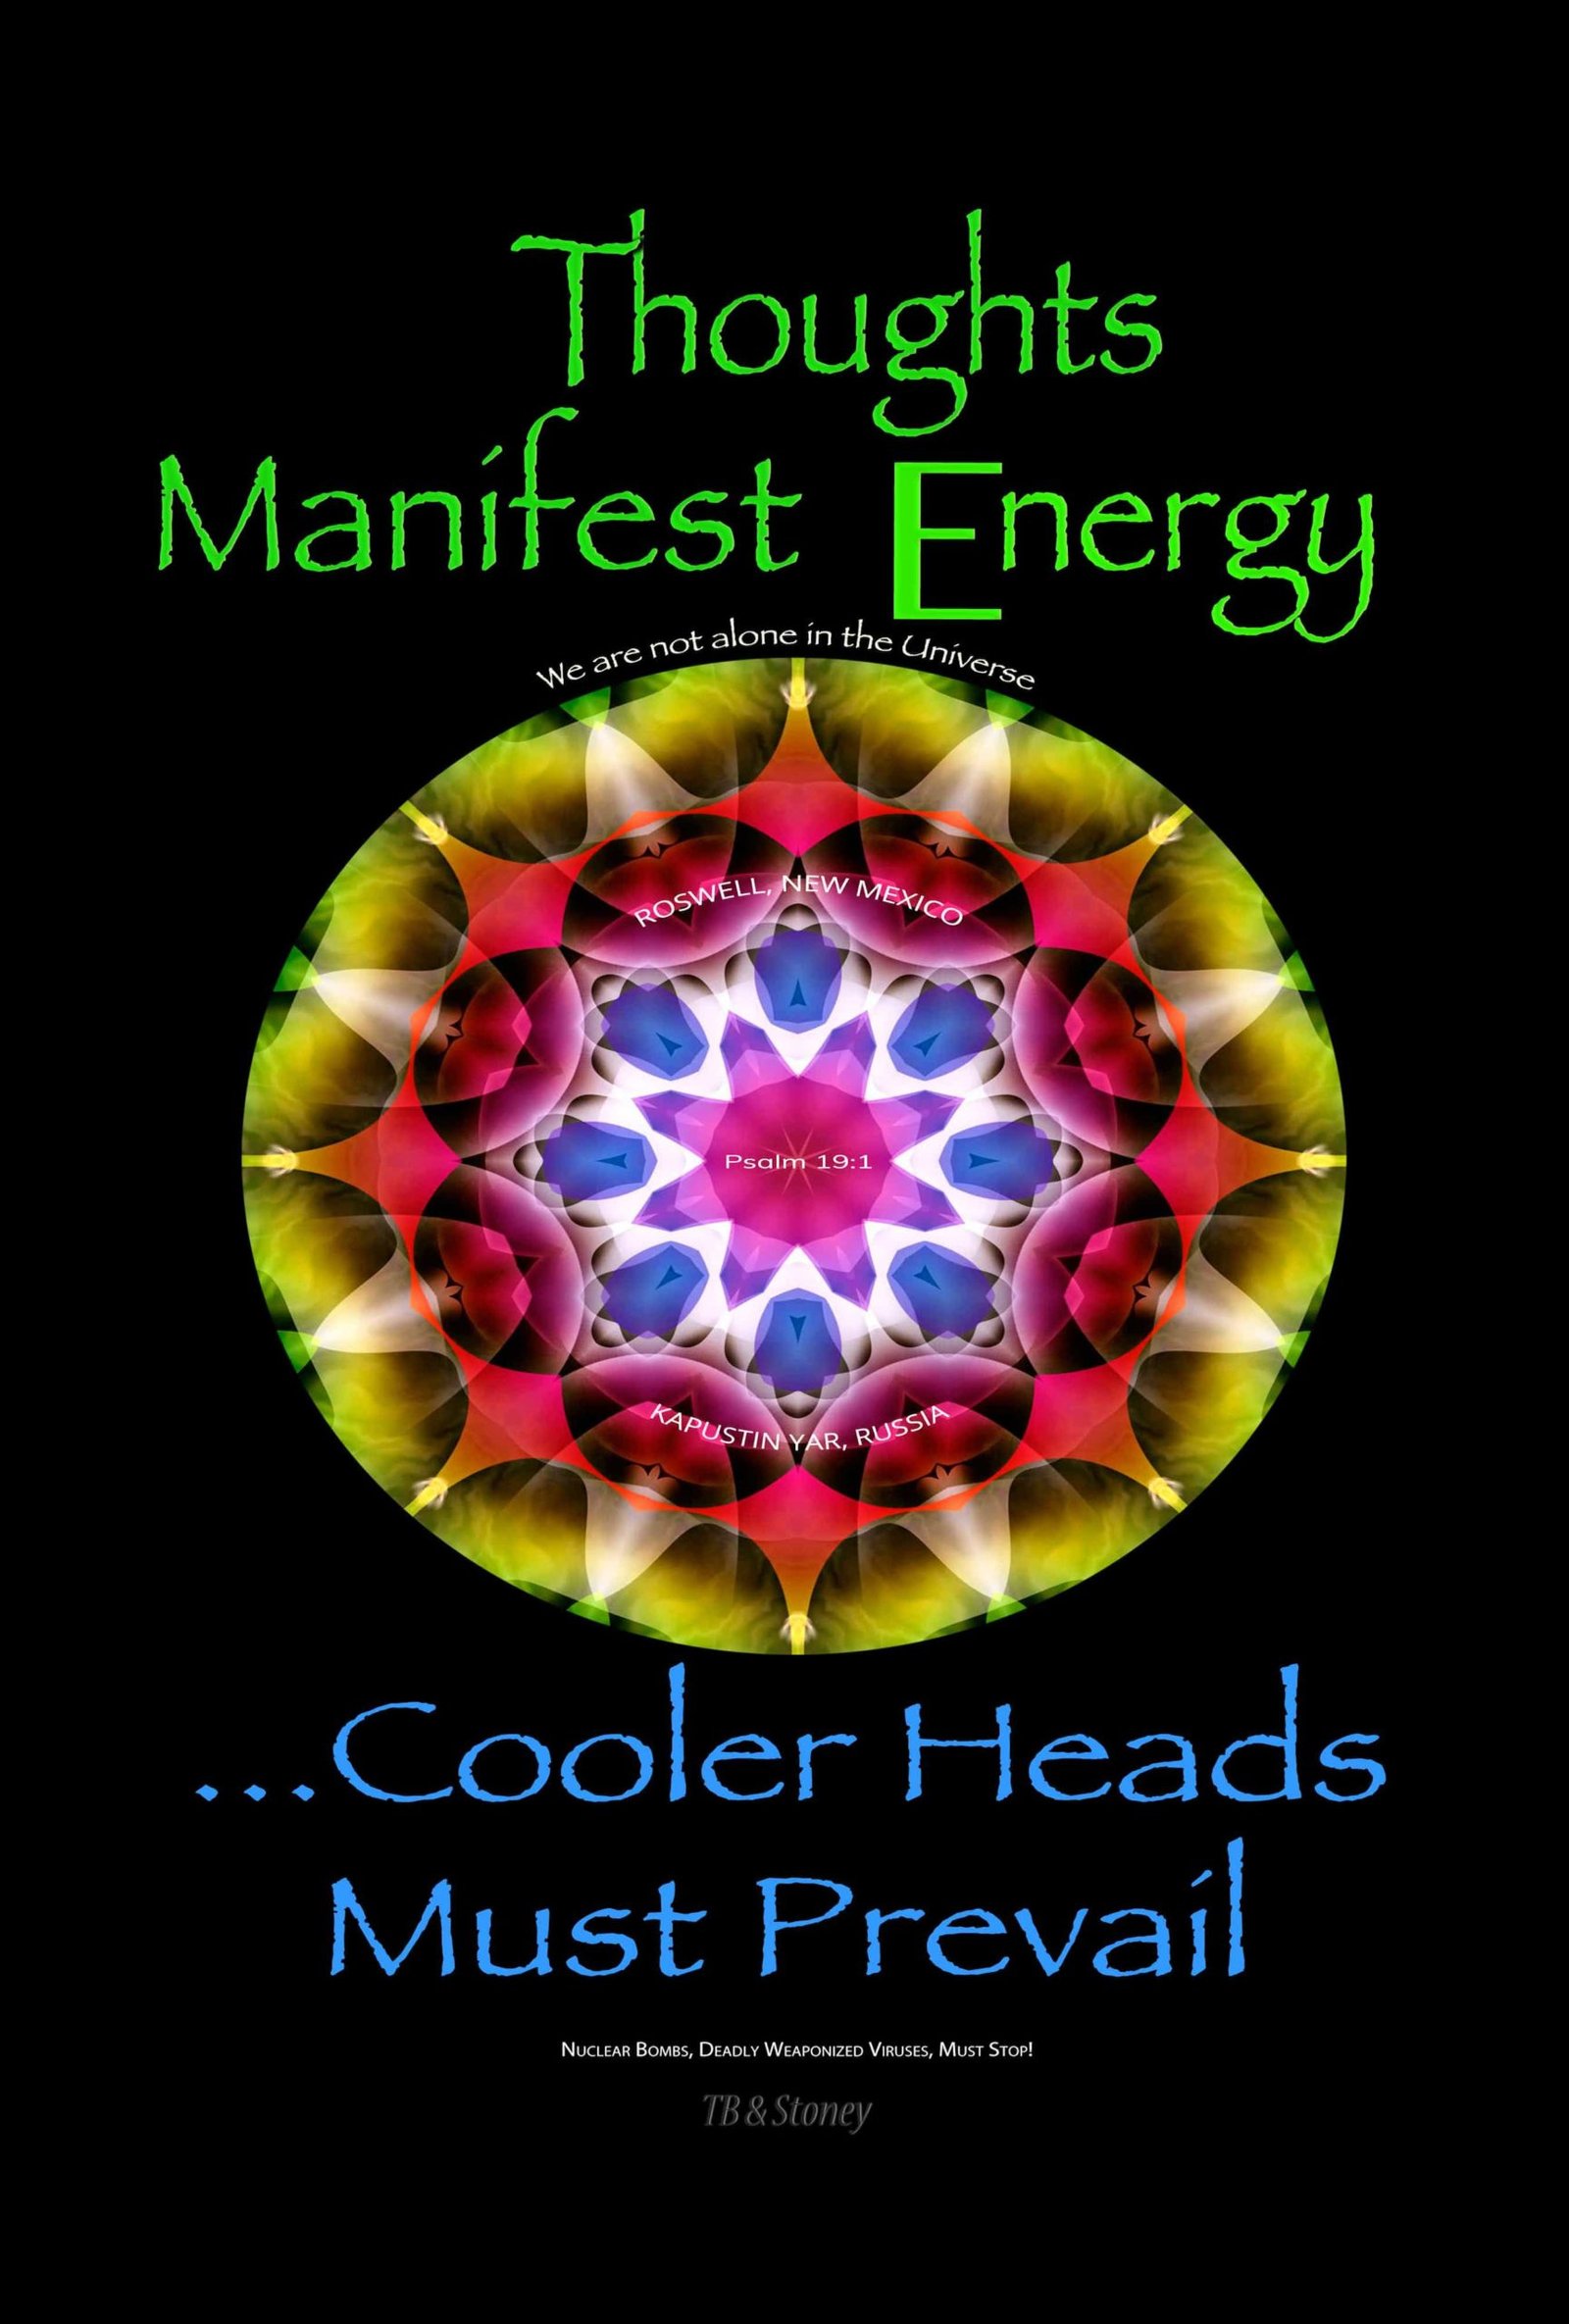 houghts Manifest Energy